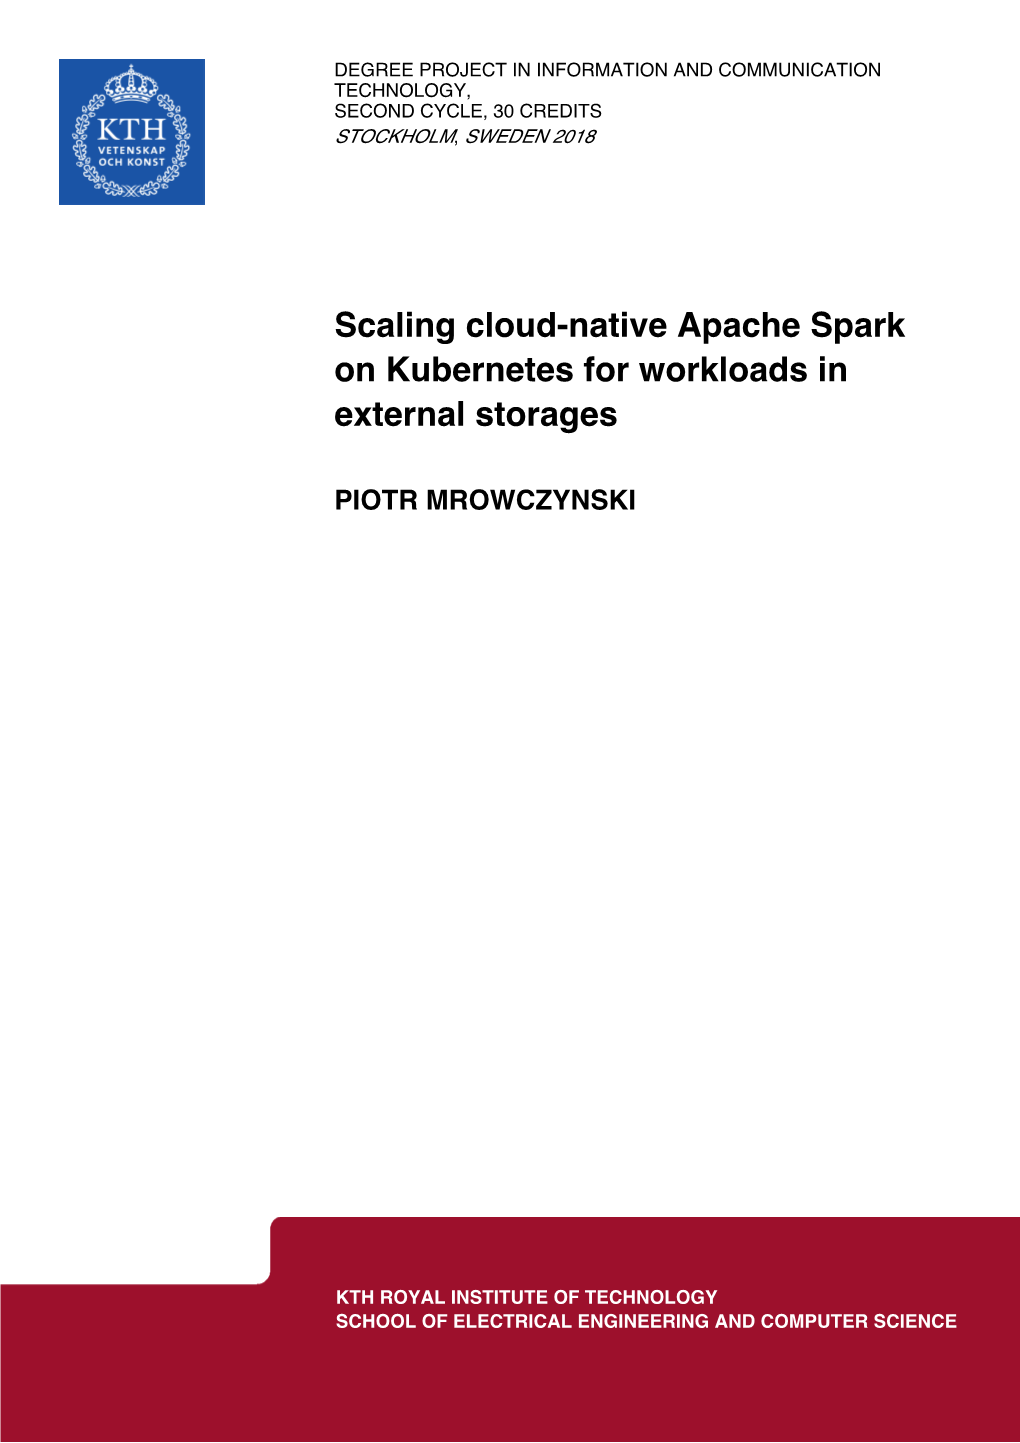 Scaling Cloud-Native Apache Spark on Kubernetes for Workloads in External Storages